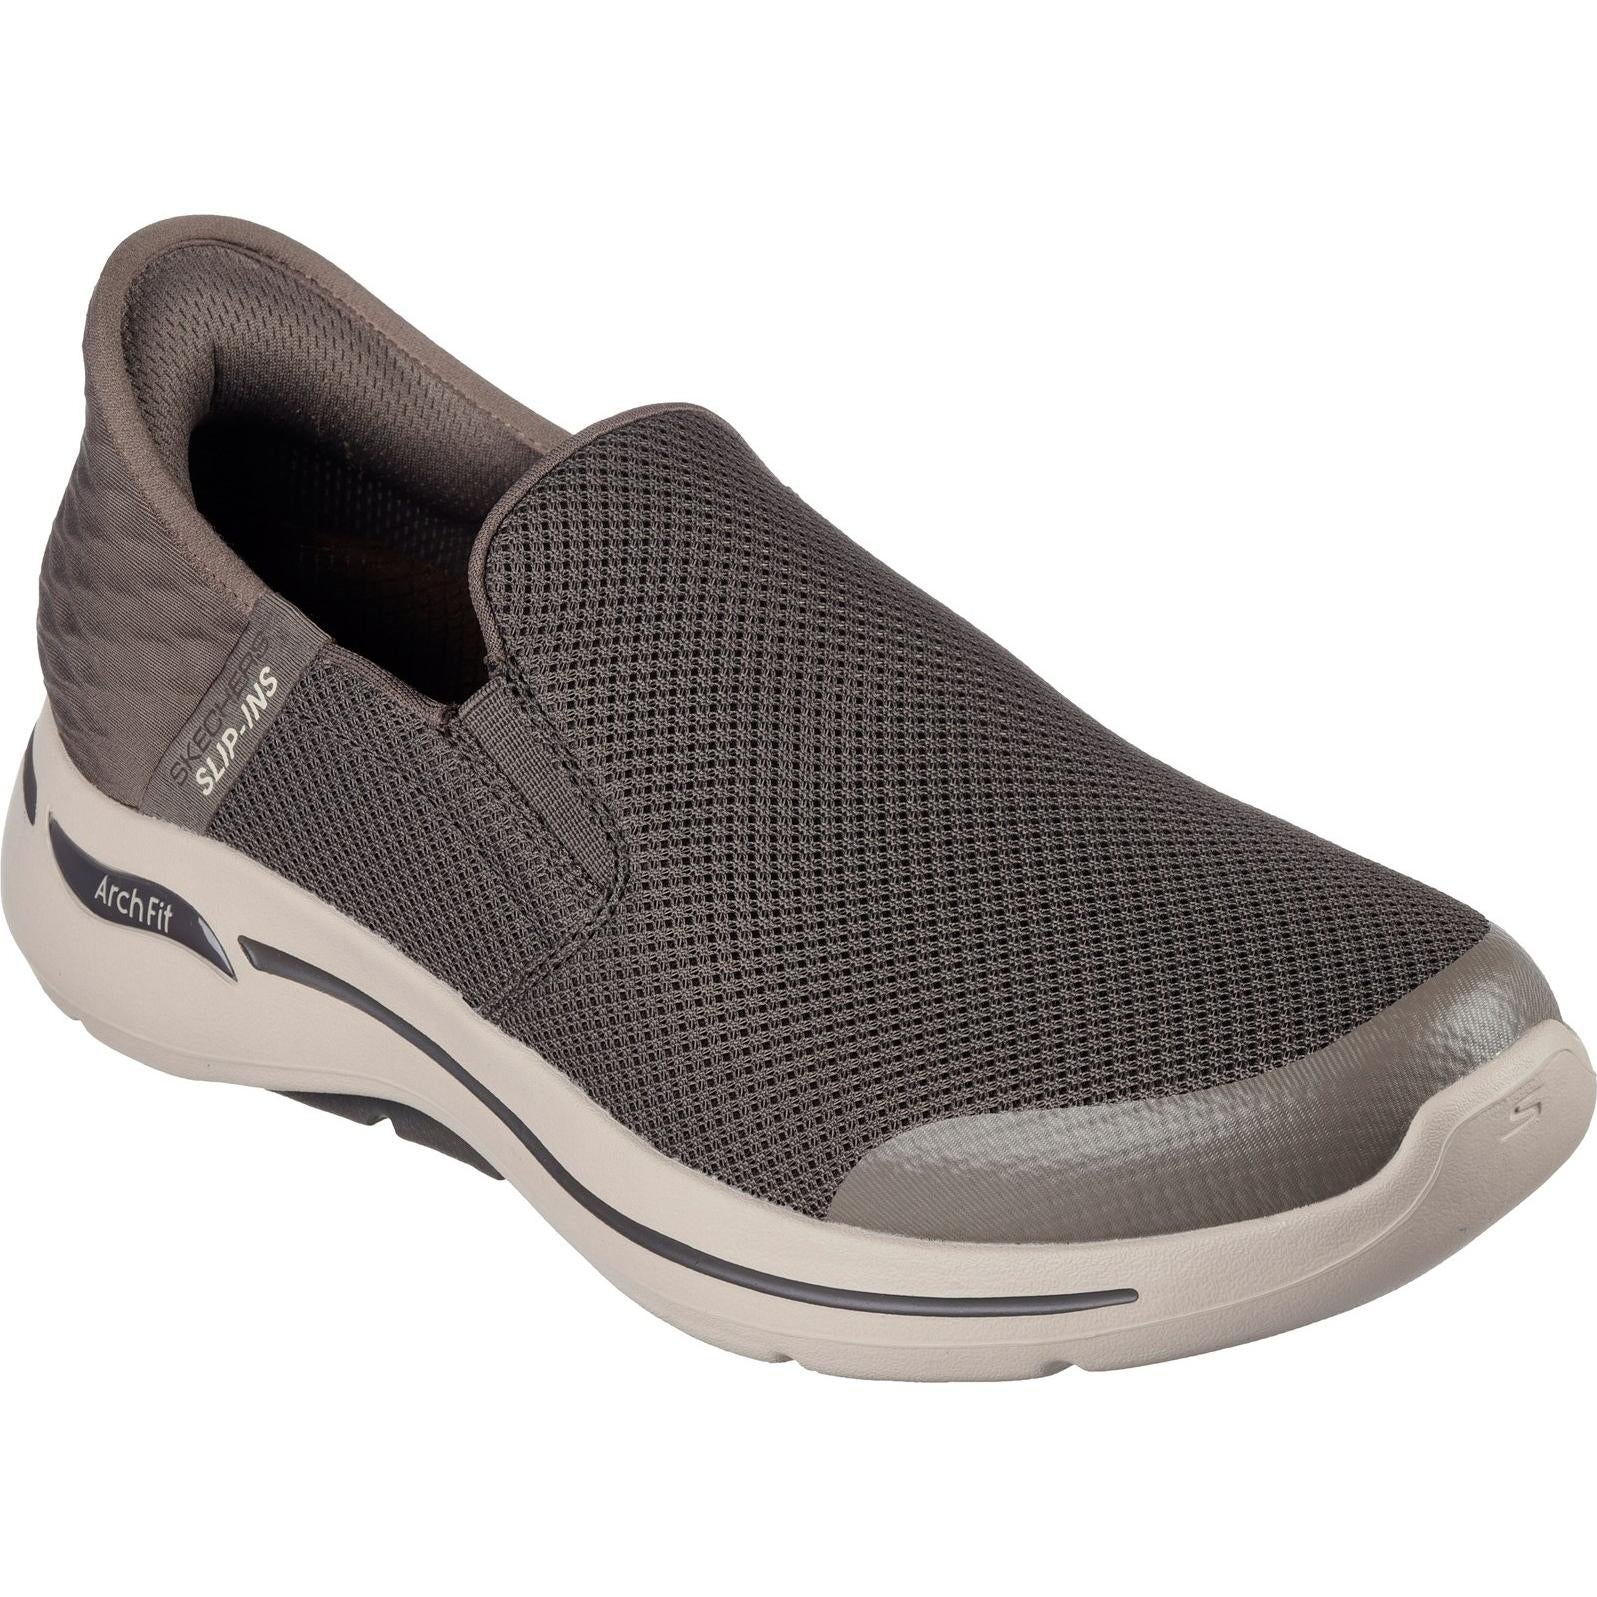 Skechers Go Walk Arch Fit Hands Free Shoes